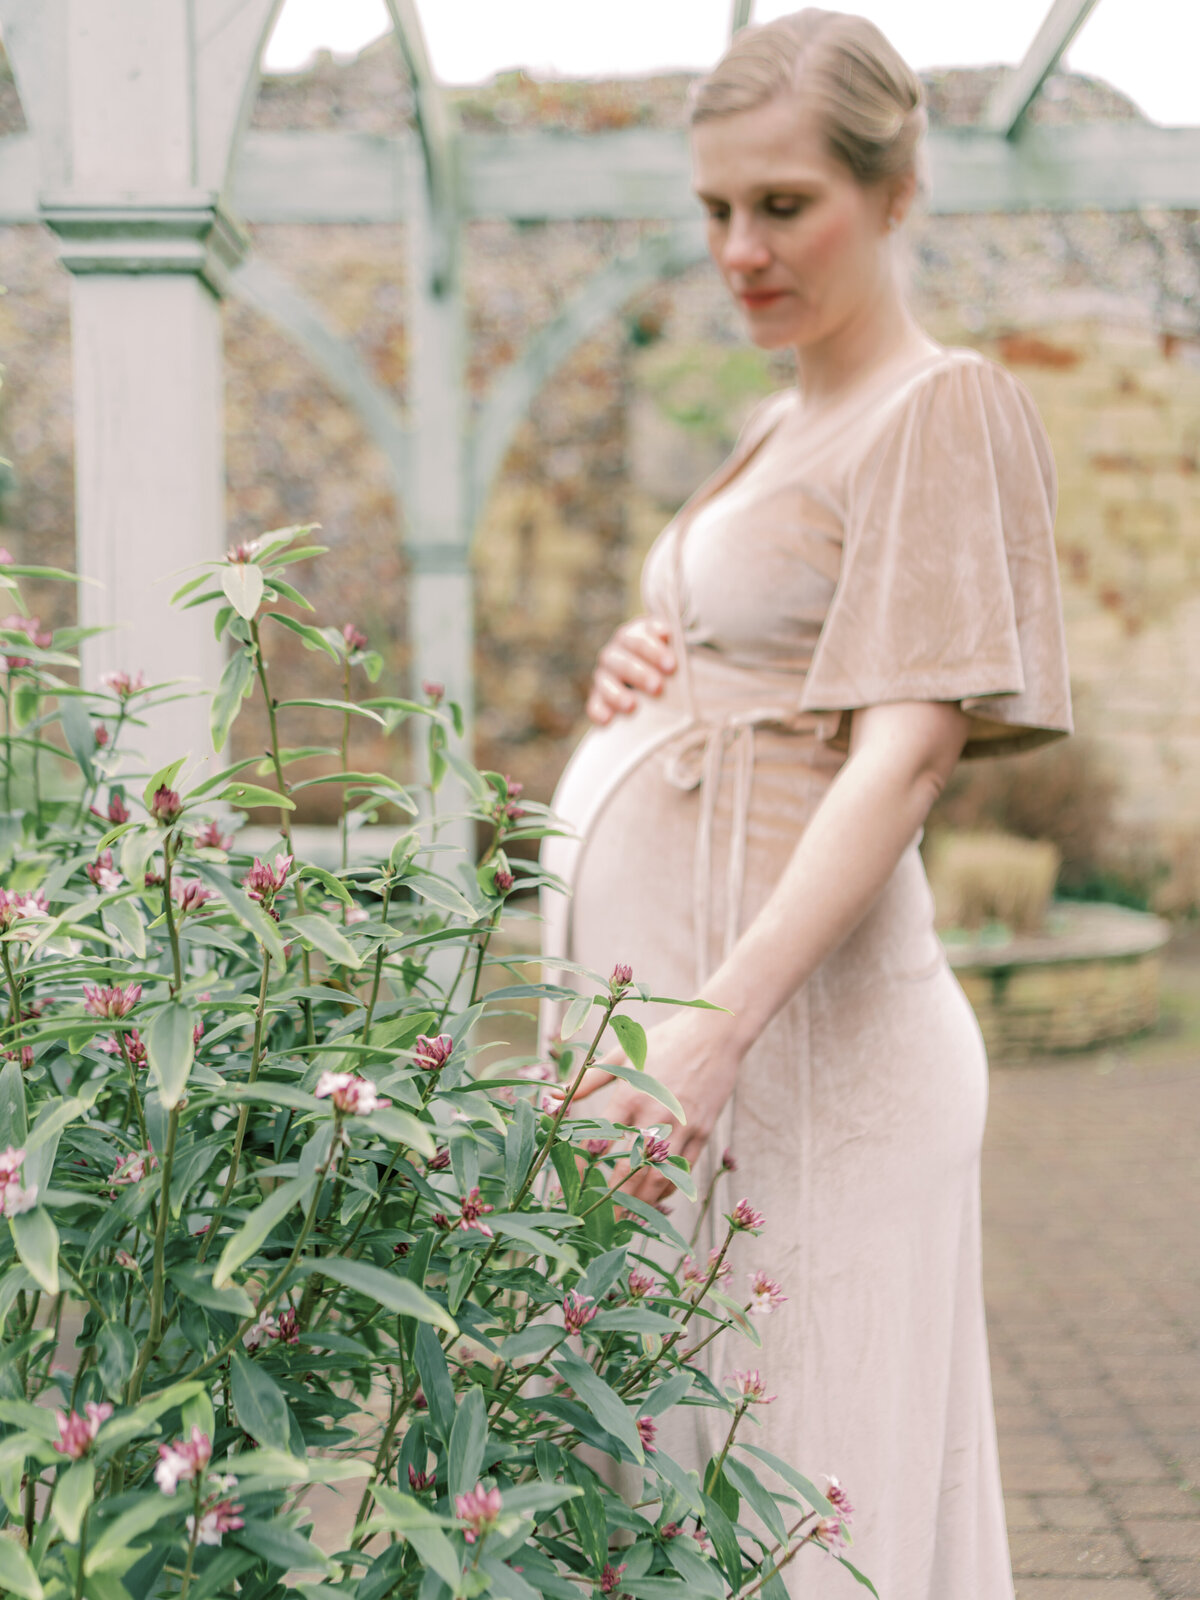 Pregnant mother reaches for flowers in gardens by Maternity photographer Courtney Cronin in Oklahoma City